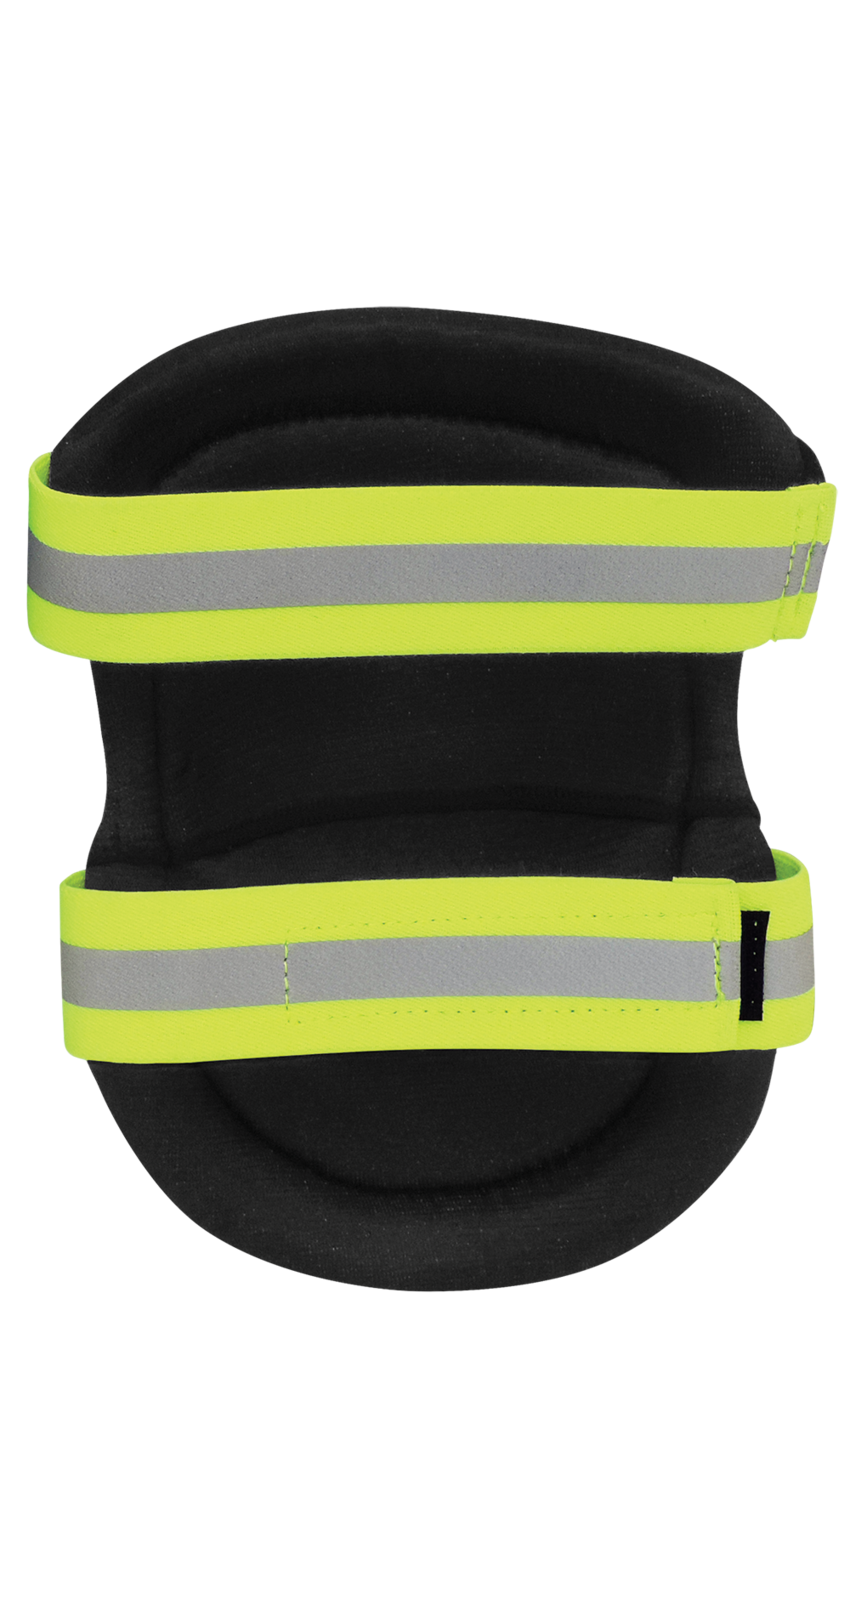 FrogWear™ Knee Protection High-Visibility, Brass-Riveted, PE Hard Cap, Non-Marring Knee Pads